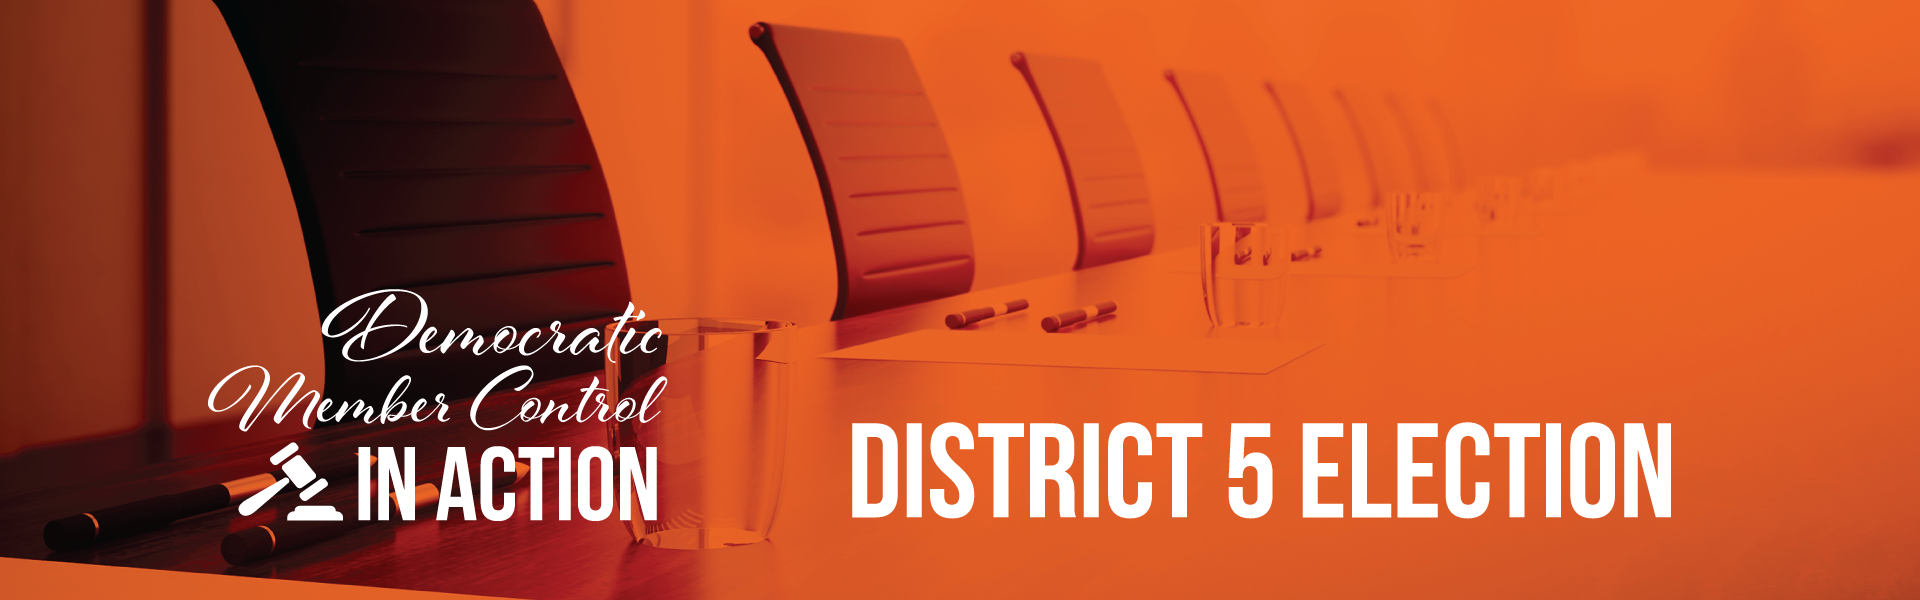 District 5 Election - Democratic Member Control in Action 